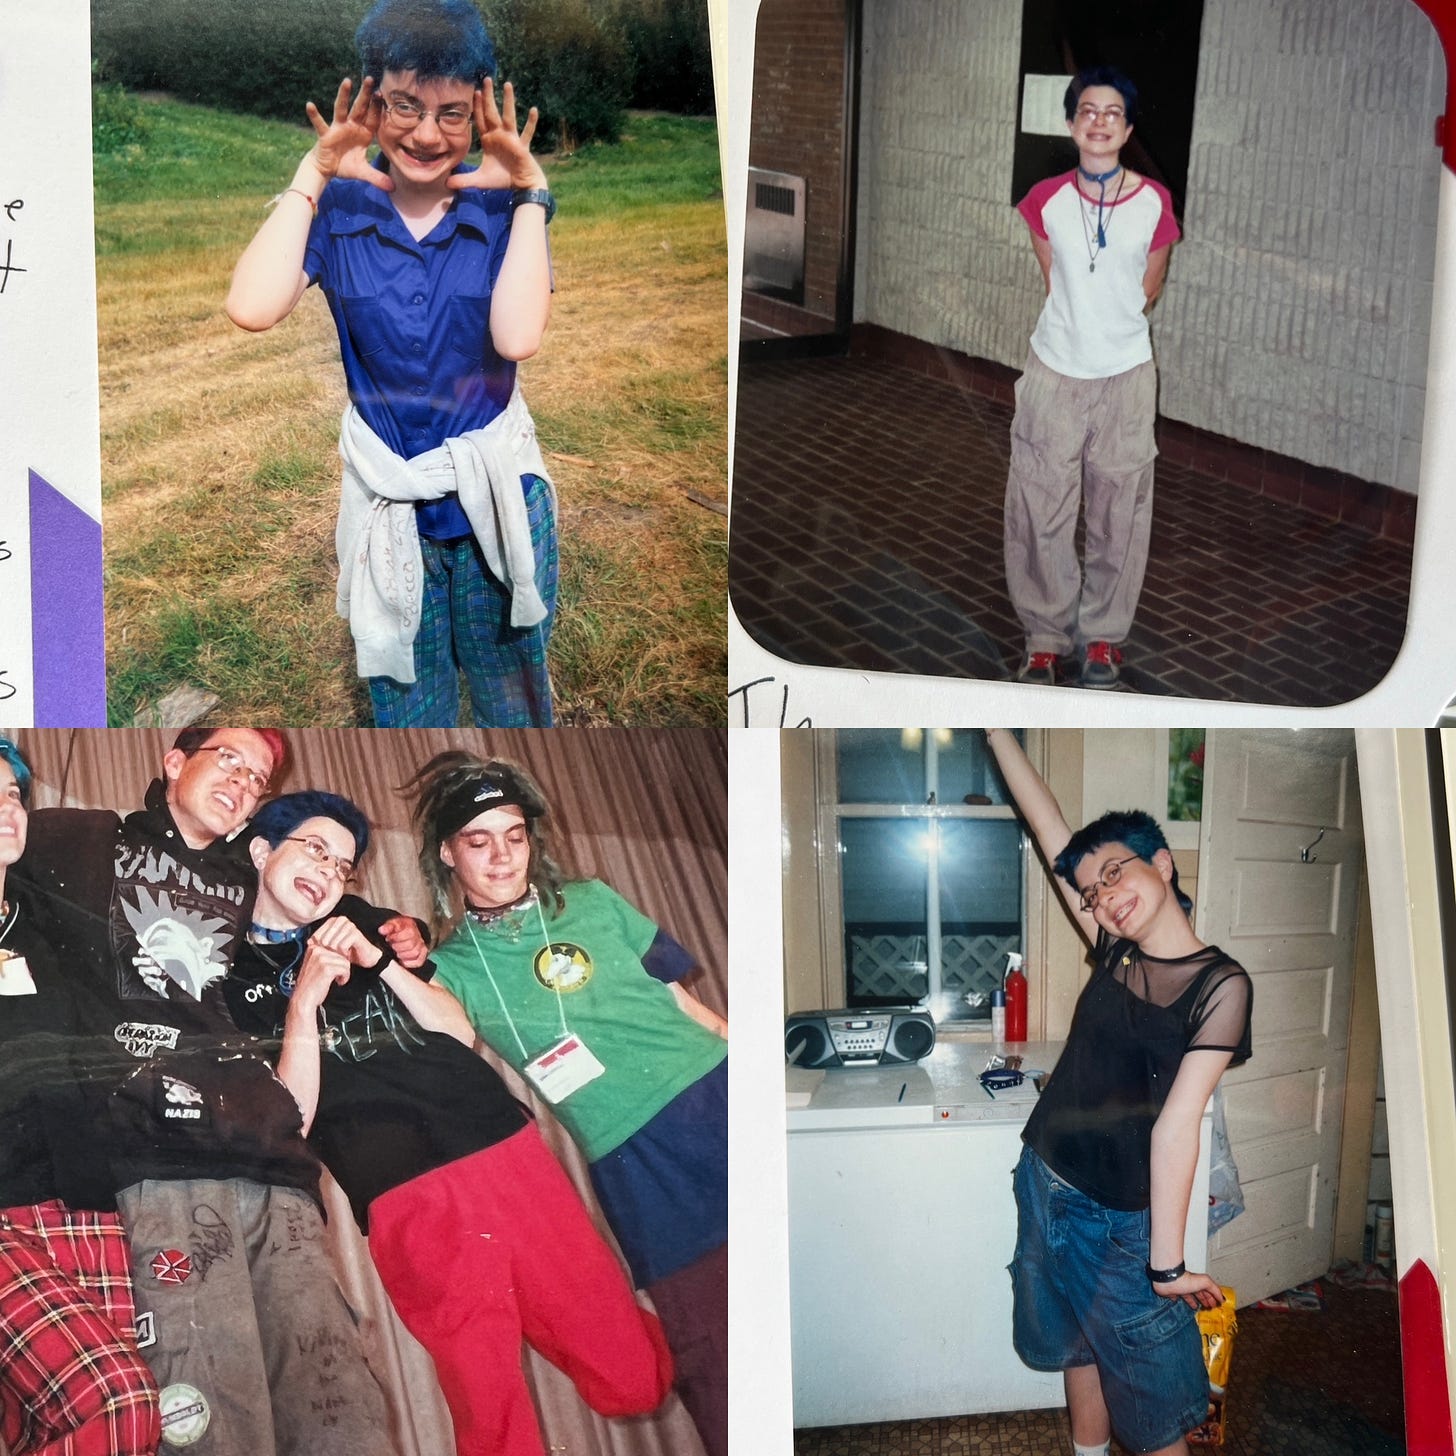 Four photos of the author aged roughly 14 to 16, always with short blue hair and glasses but in a variety of bright clothes. Very 90s and early oughts aesthetic. 